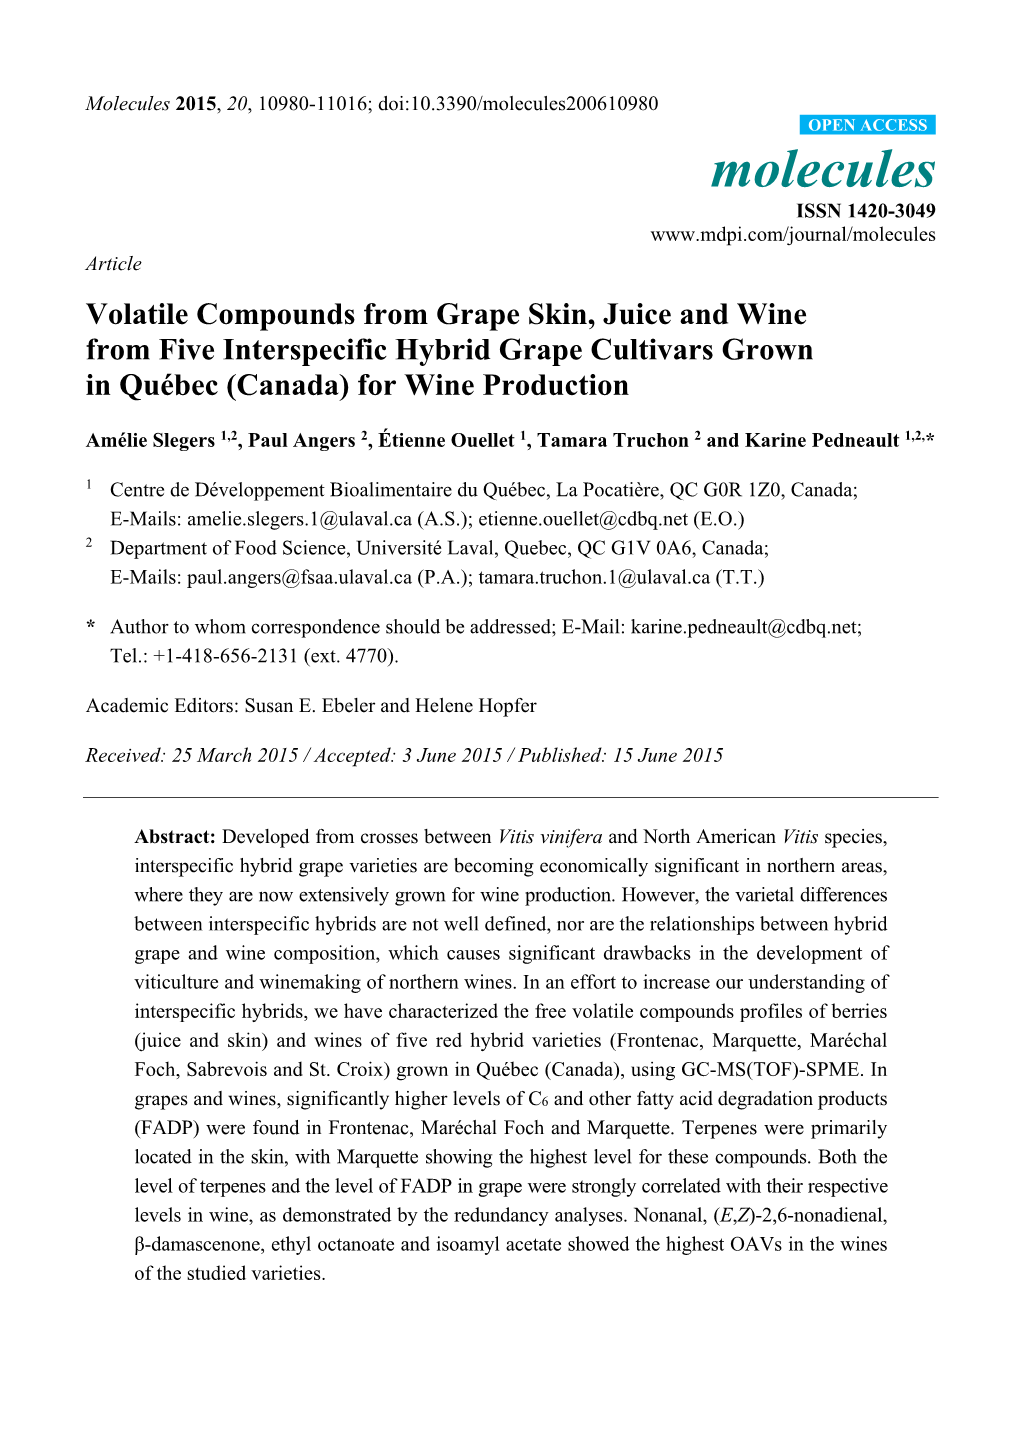 Volatile Compounds from Grape Skin, Juice and Wine from Five Interspecific Hybrid Grape Cultivars Grown in Québec (Canada) for Wine Production